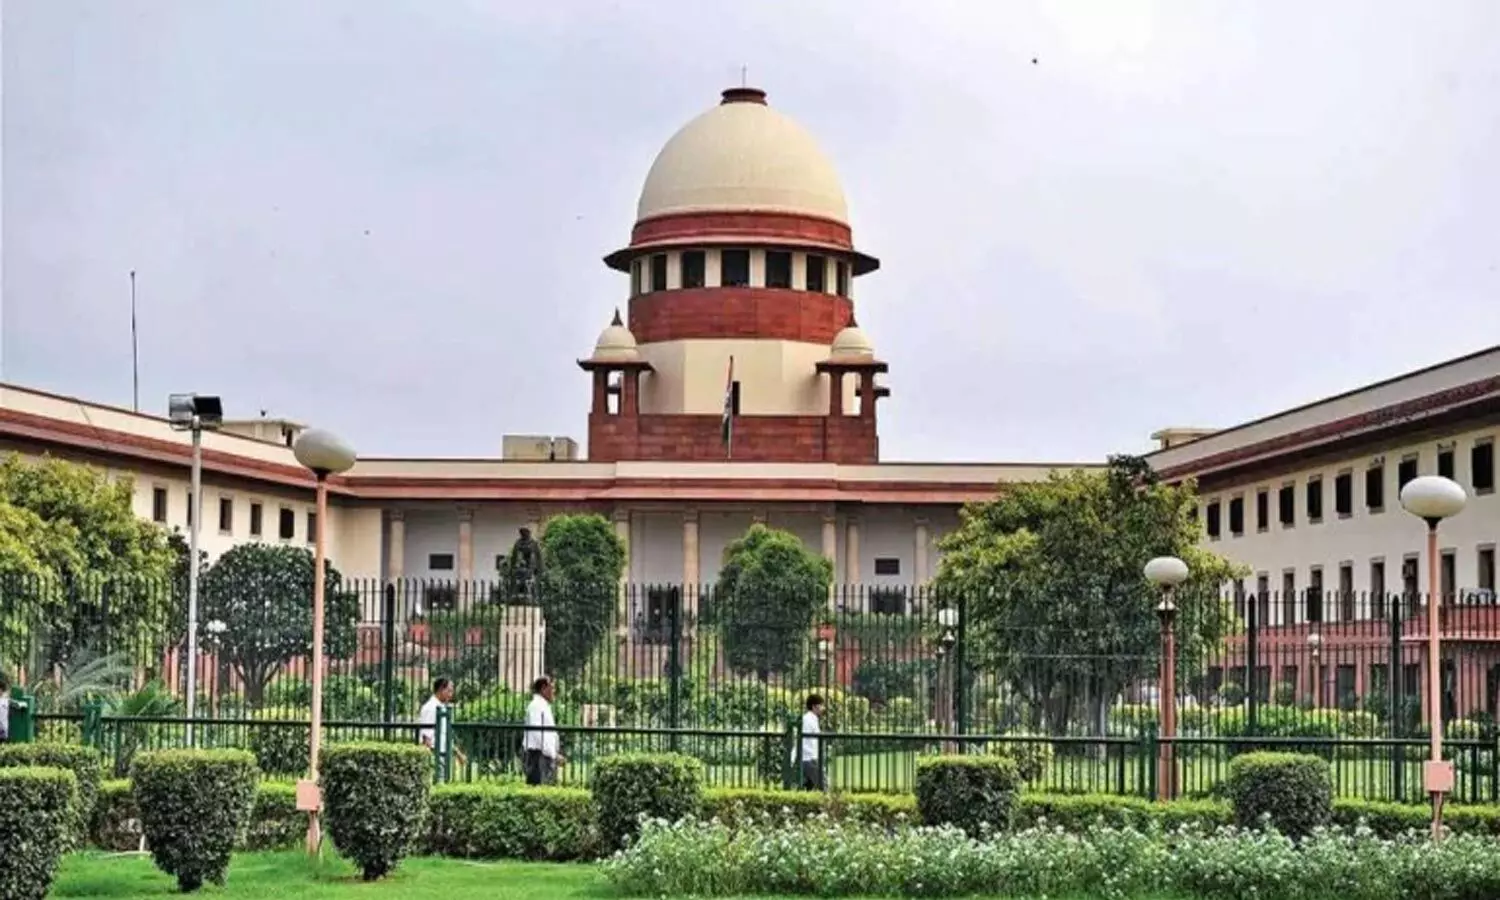 Can students with additional Biology subject study MBBS: SC to decide on NMC plea